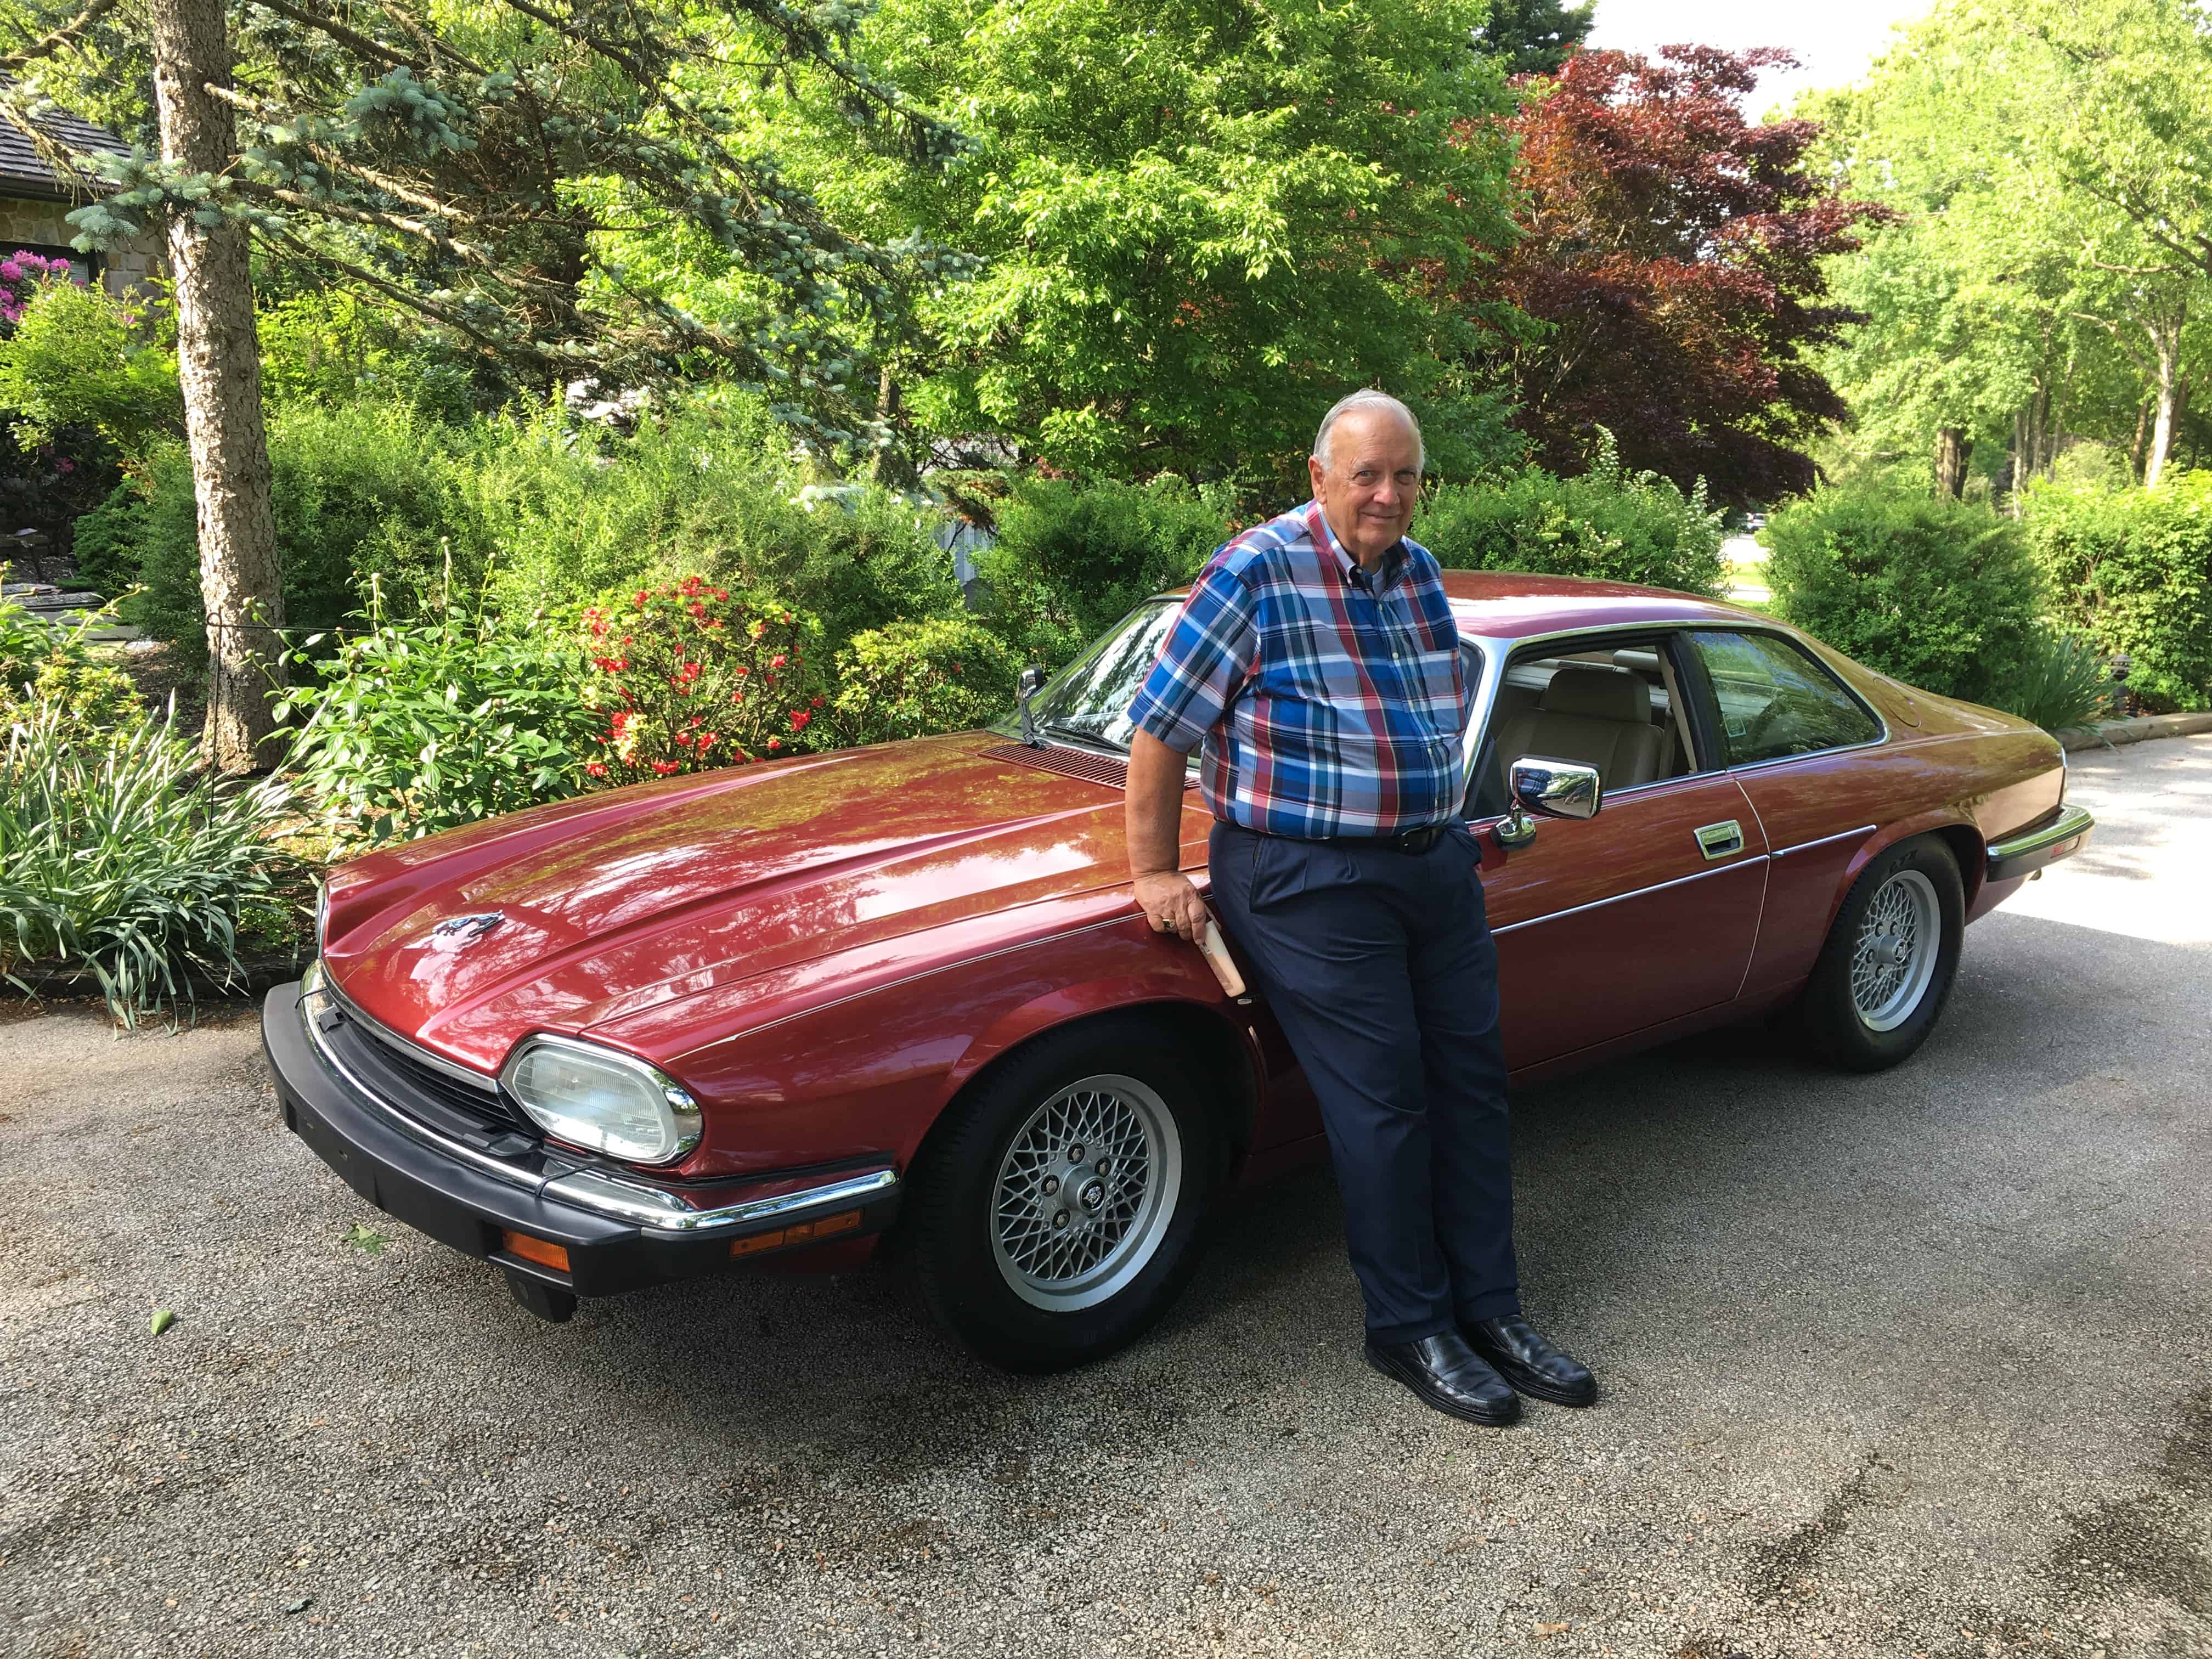 C.M.'s father poses next to a 1993 Jaguar XJS, one of a few classic cars owned by his son. | Submitted photo